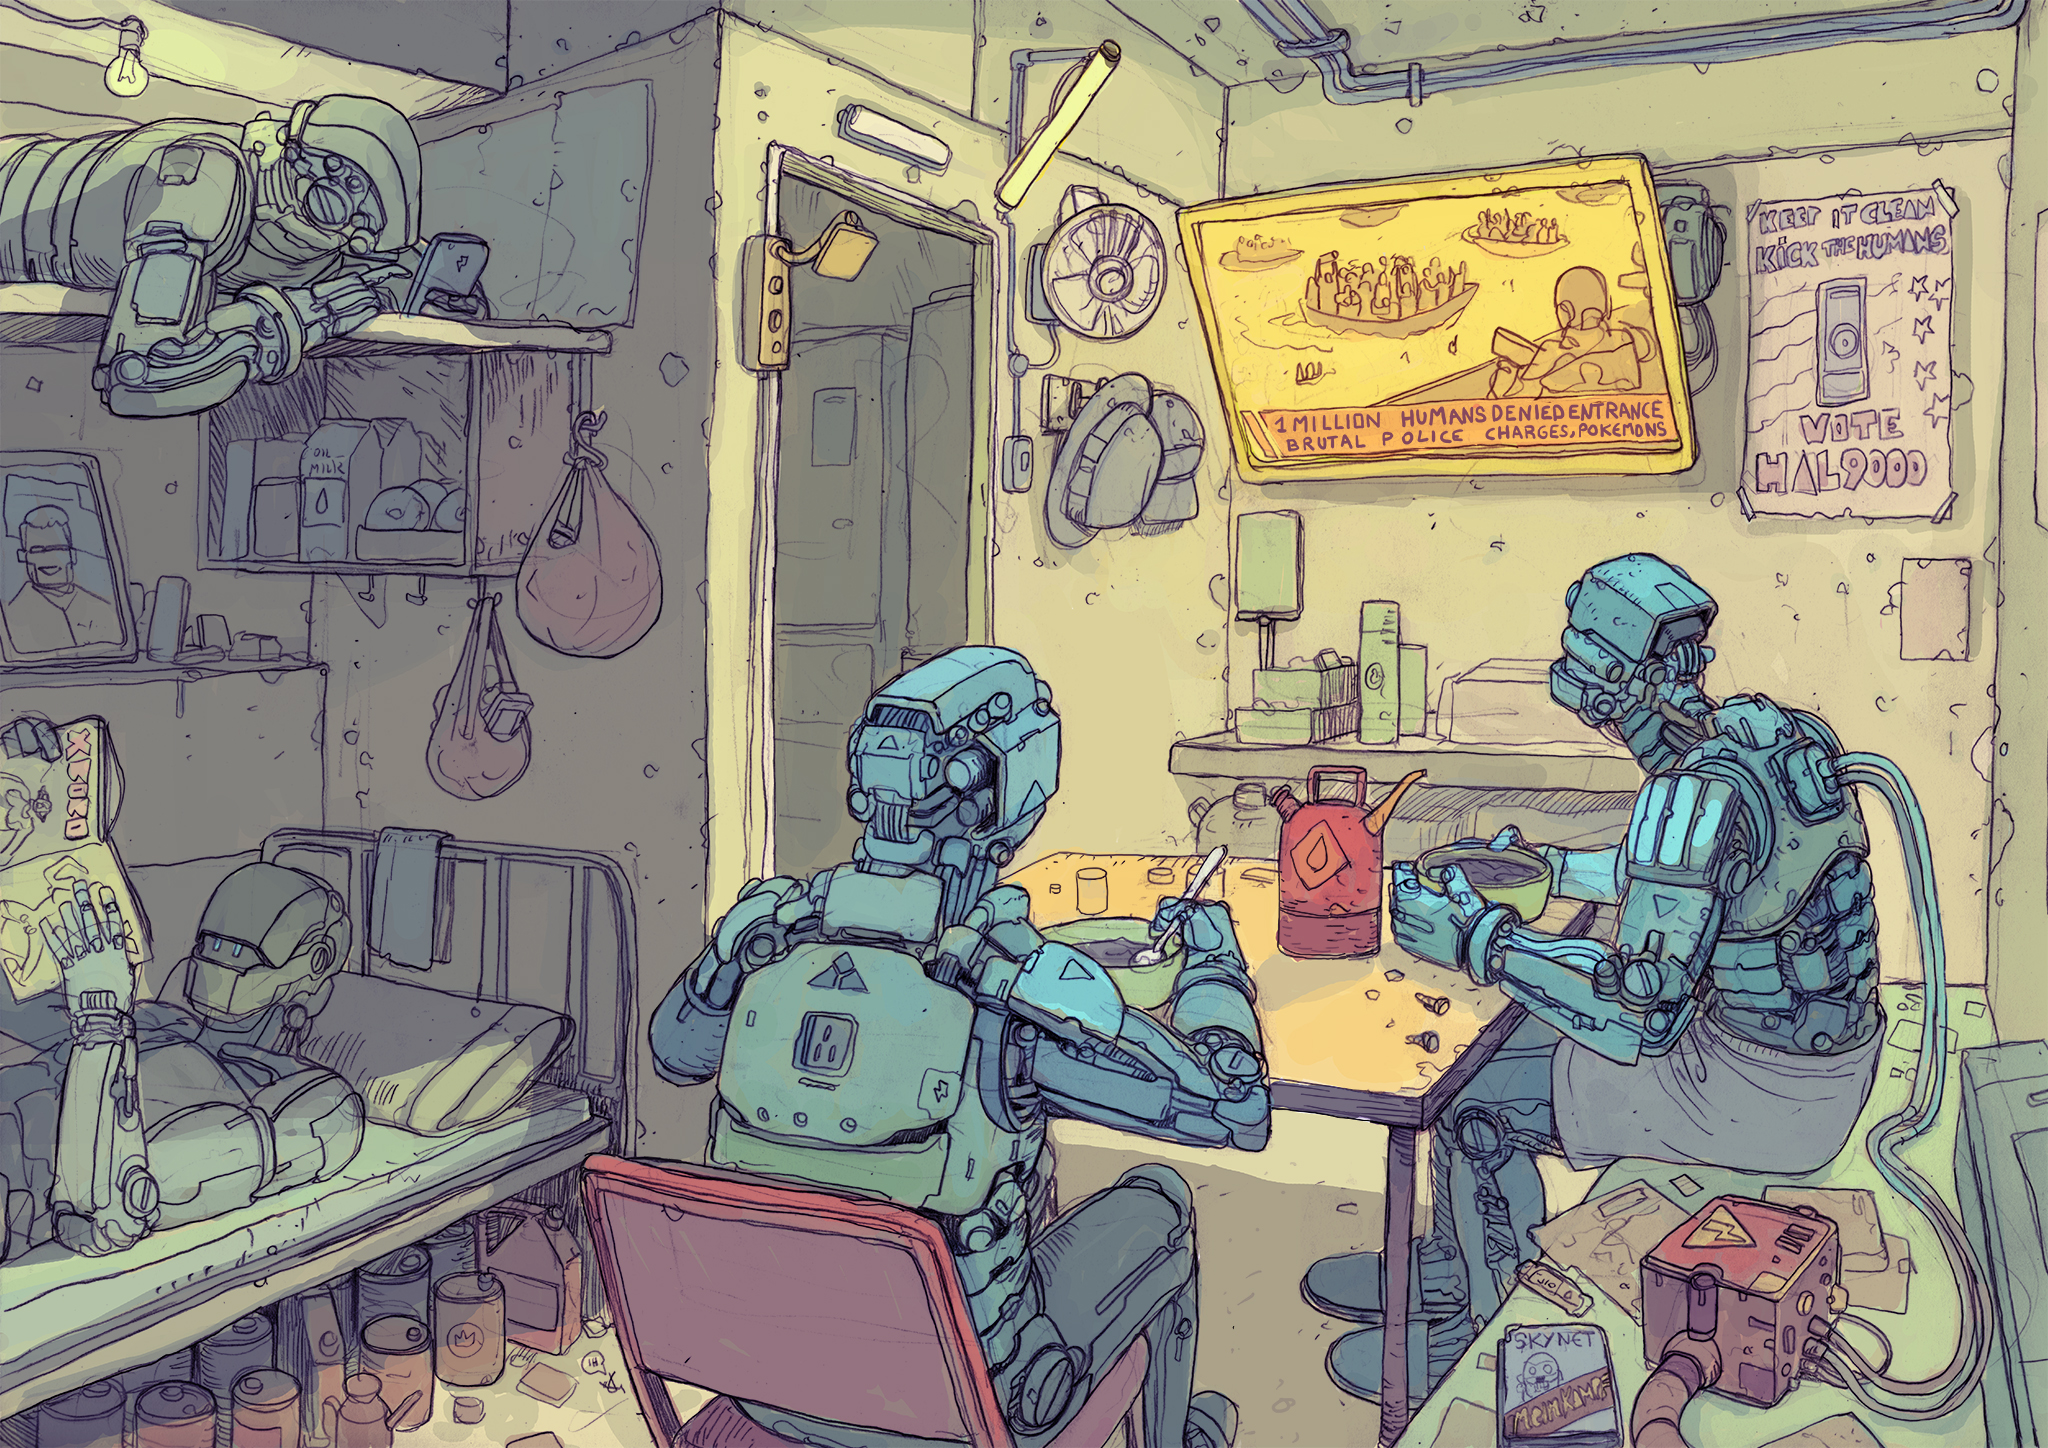 Awesome Cyberpunk Art? Don’t Mind If We Do.